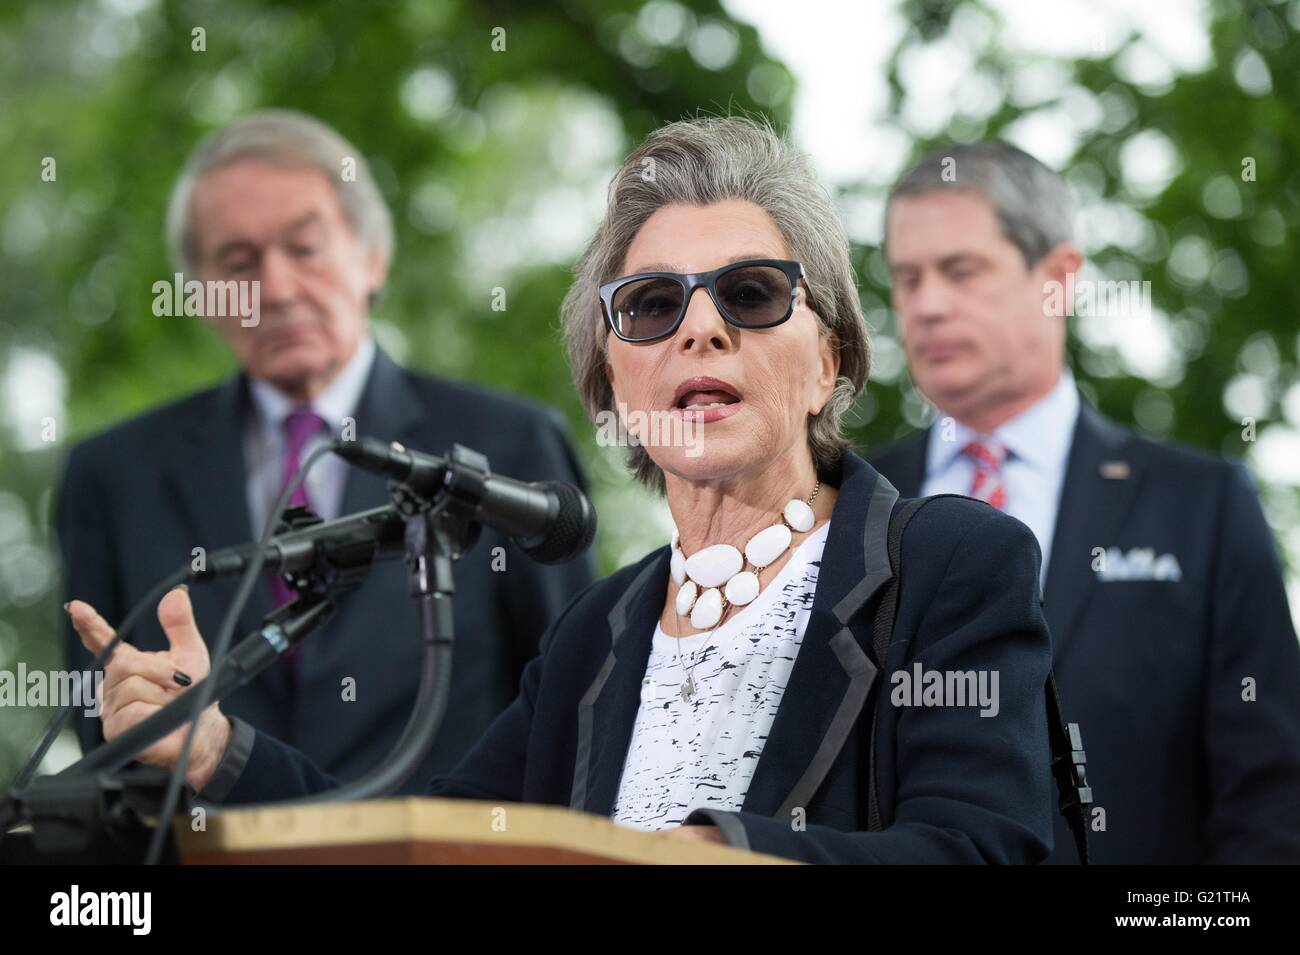 U.S Senator Barbara Boxer of California joined by other Democratic Senators during a press conference on Capitol Hill May 19, 2016 in Washington, DC. Stock Photo